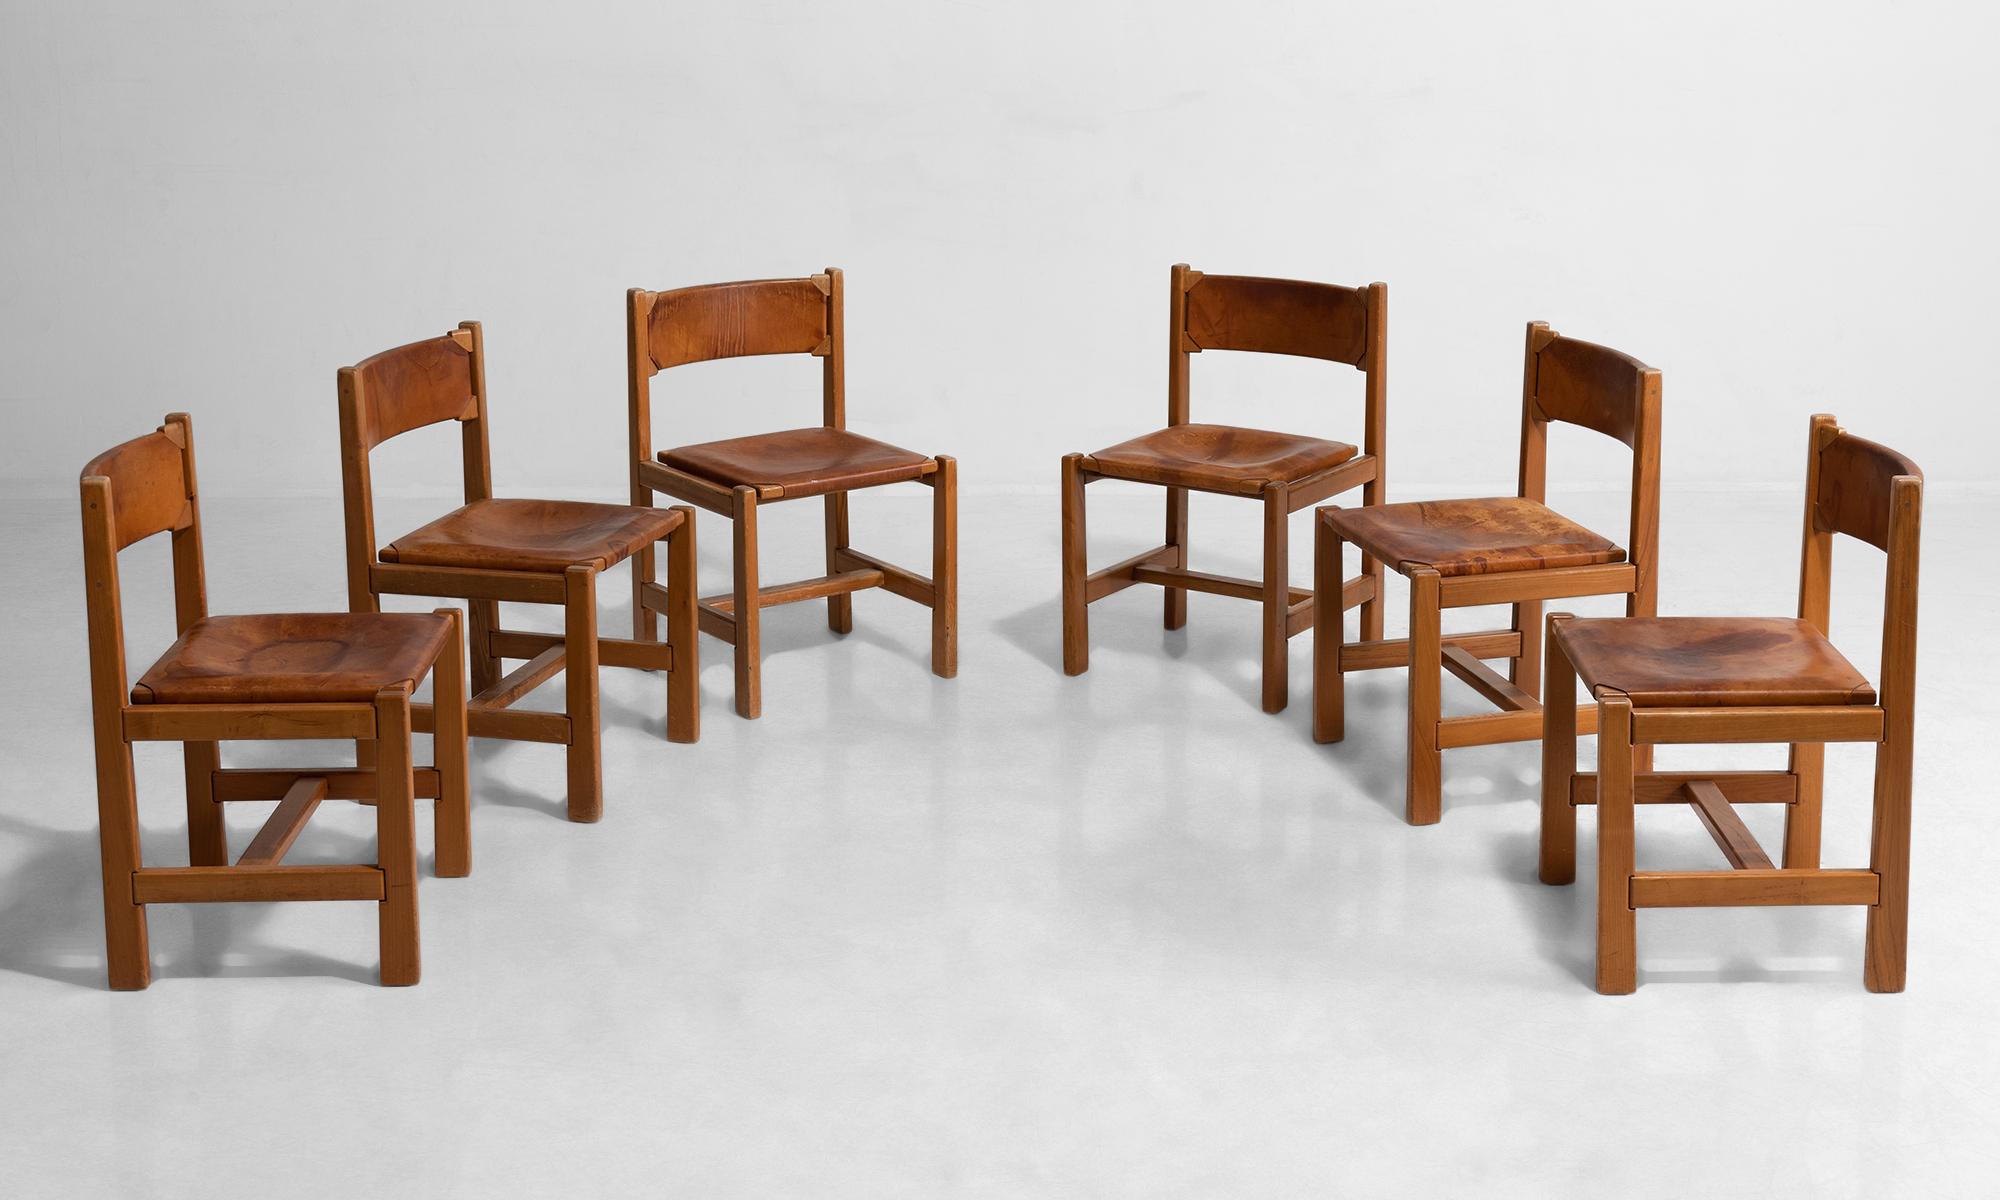 Set of (6) Maison Regain chairs, France, circa 1970.

Elm frame with original leather upholstery.